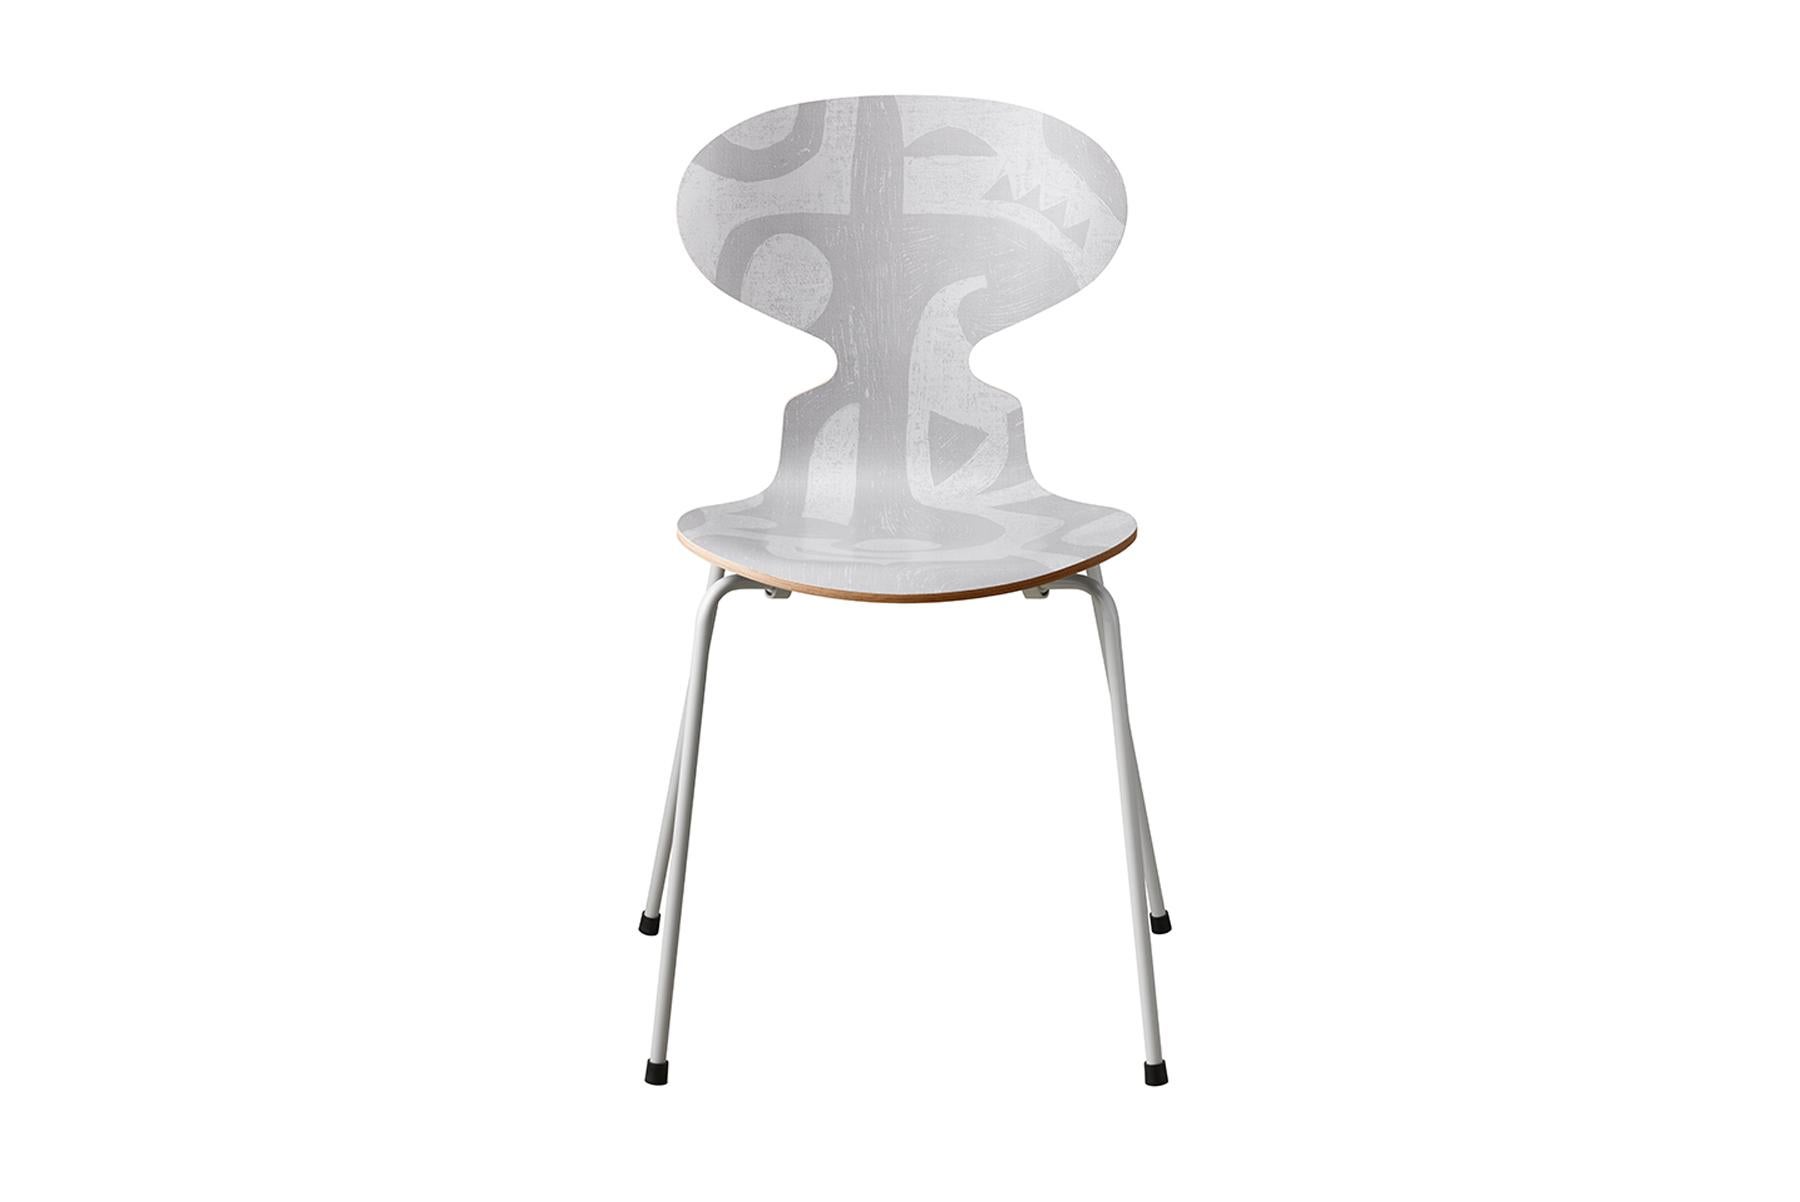 Arne Jacobsen’s chair design is named for the outline of an ant with its head raised. Despite its slender shape, Ant is strong and famously comfortable. Ant Deco silhouette is the first printed version of the chair ever released and features a print